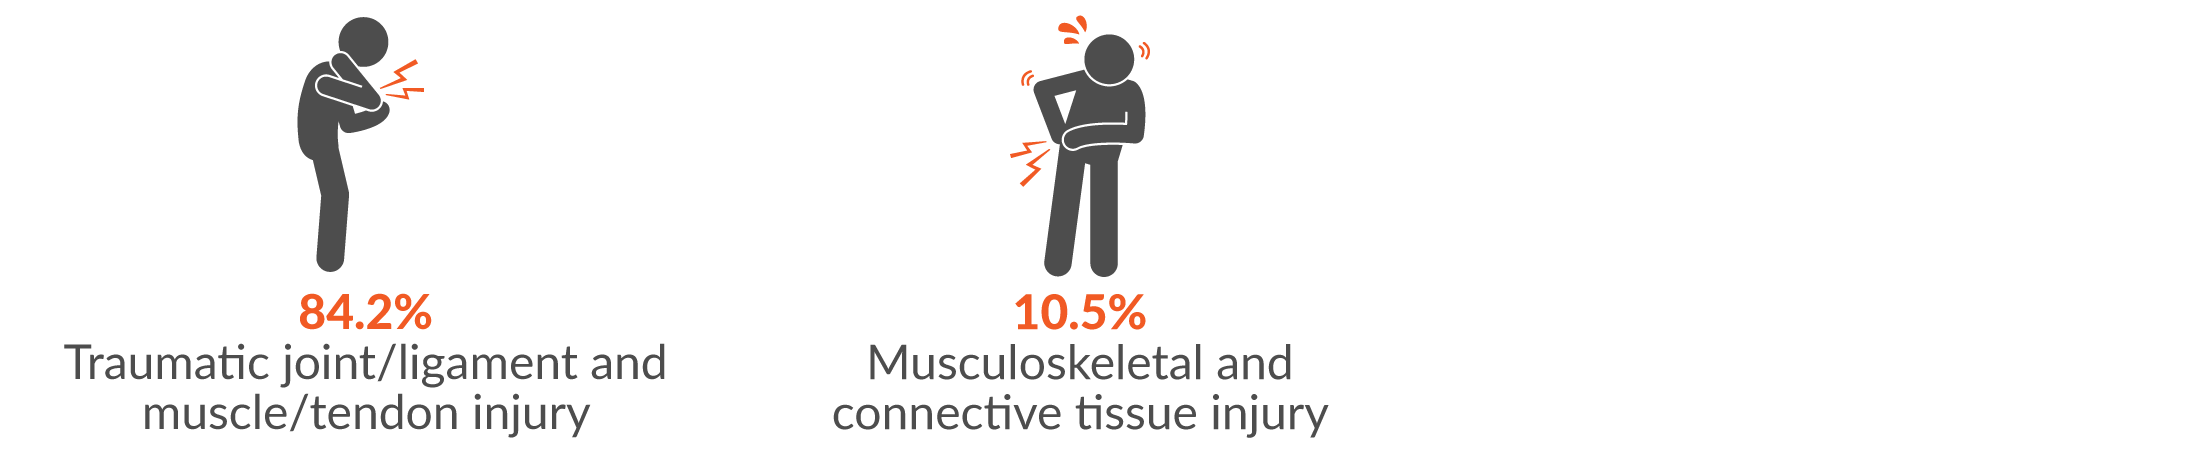 84.2% traumatic joint/ligament and muscle/tendon injury; and 10.5% musculoskeletal and connective tissue diseases.